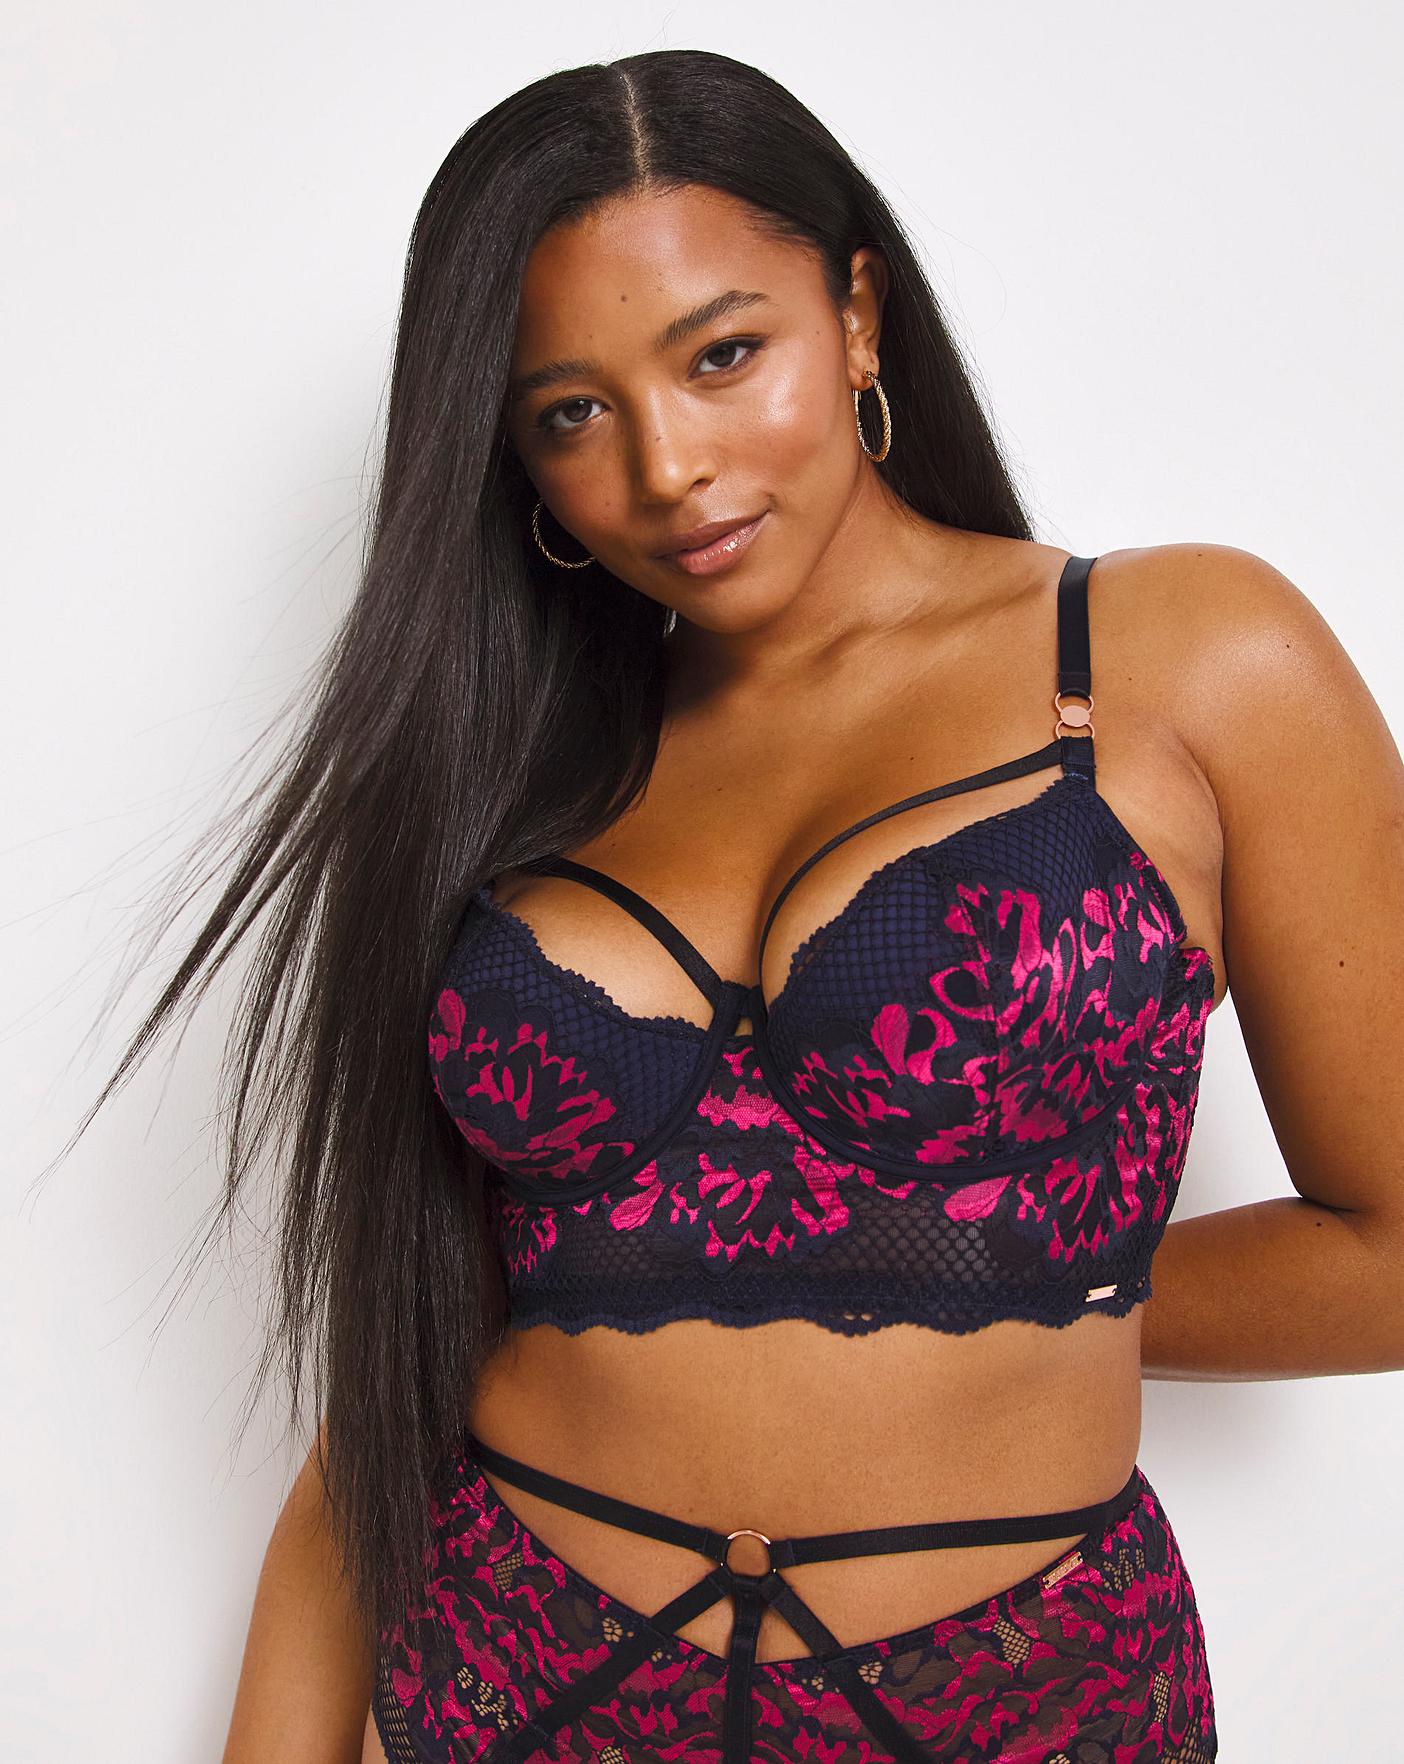 Shop Figleaves Women's Padded Bras up to 50% Off